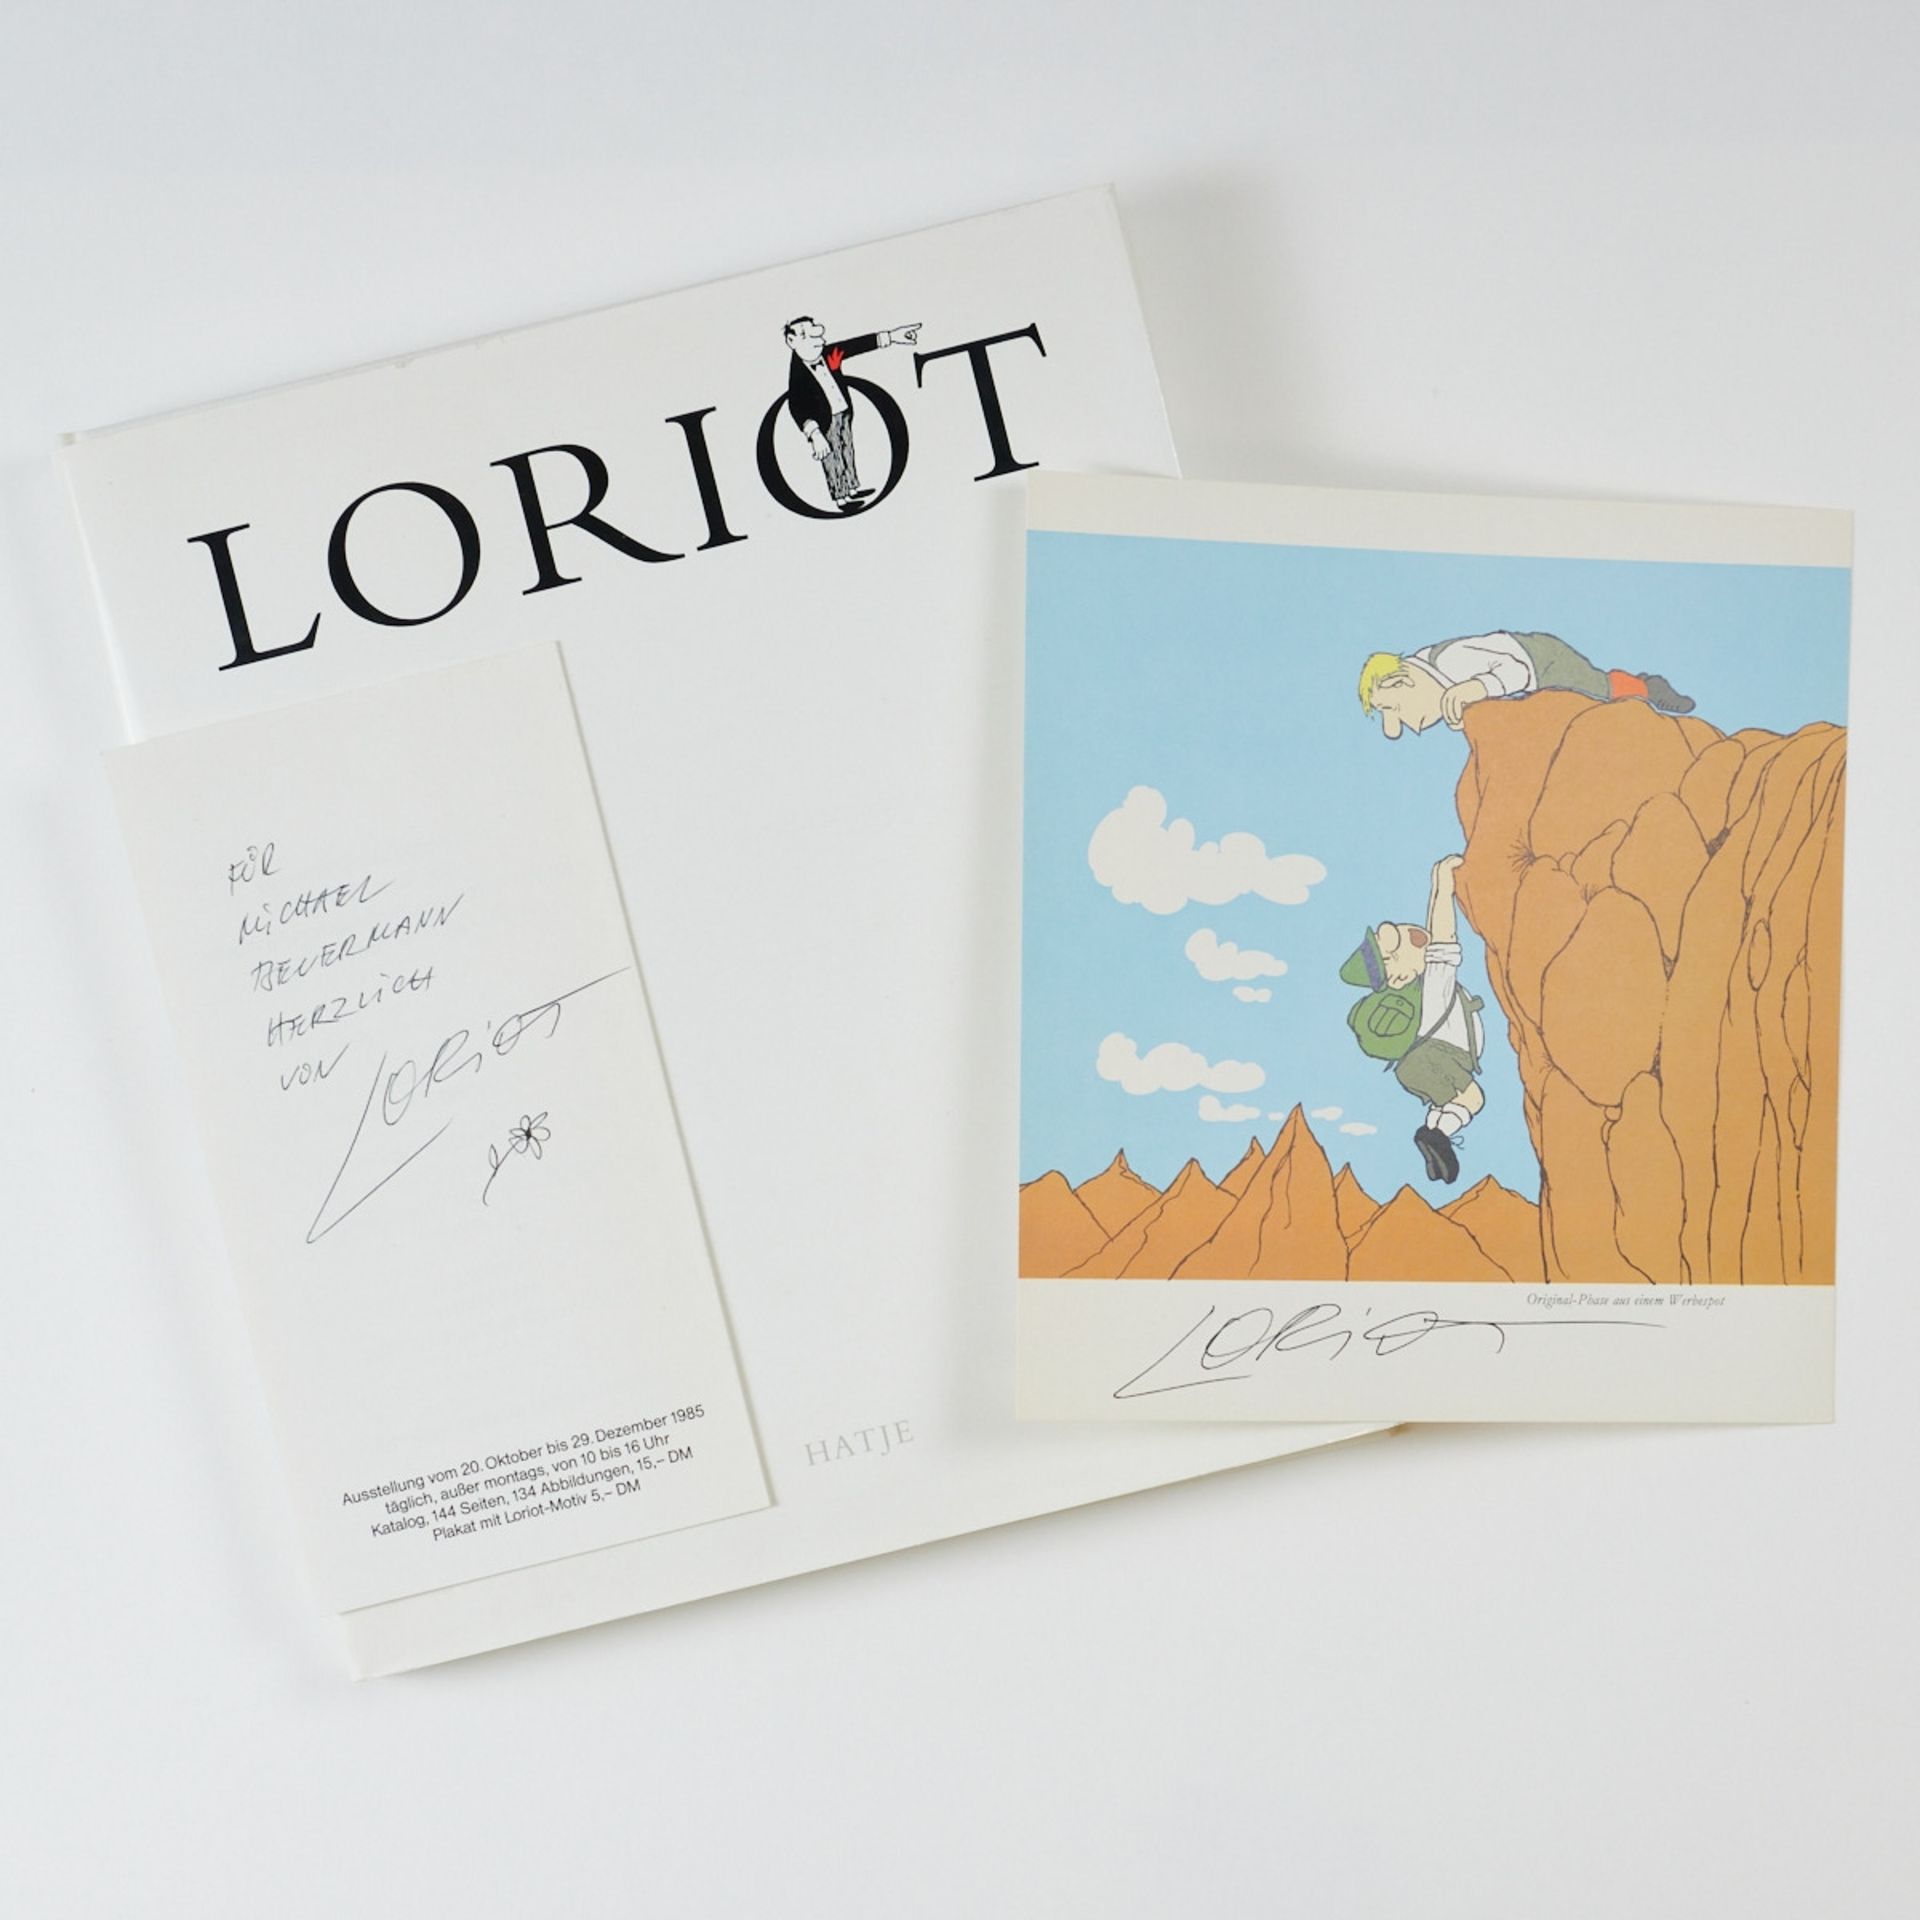 LORIOT - Image 3 of 3